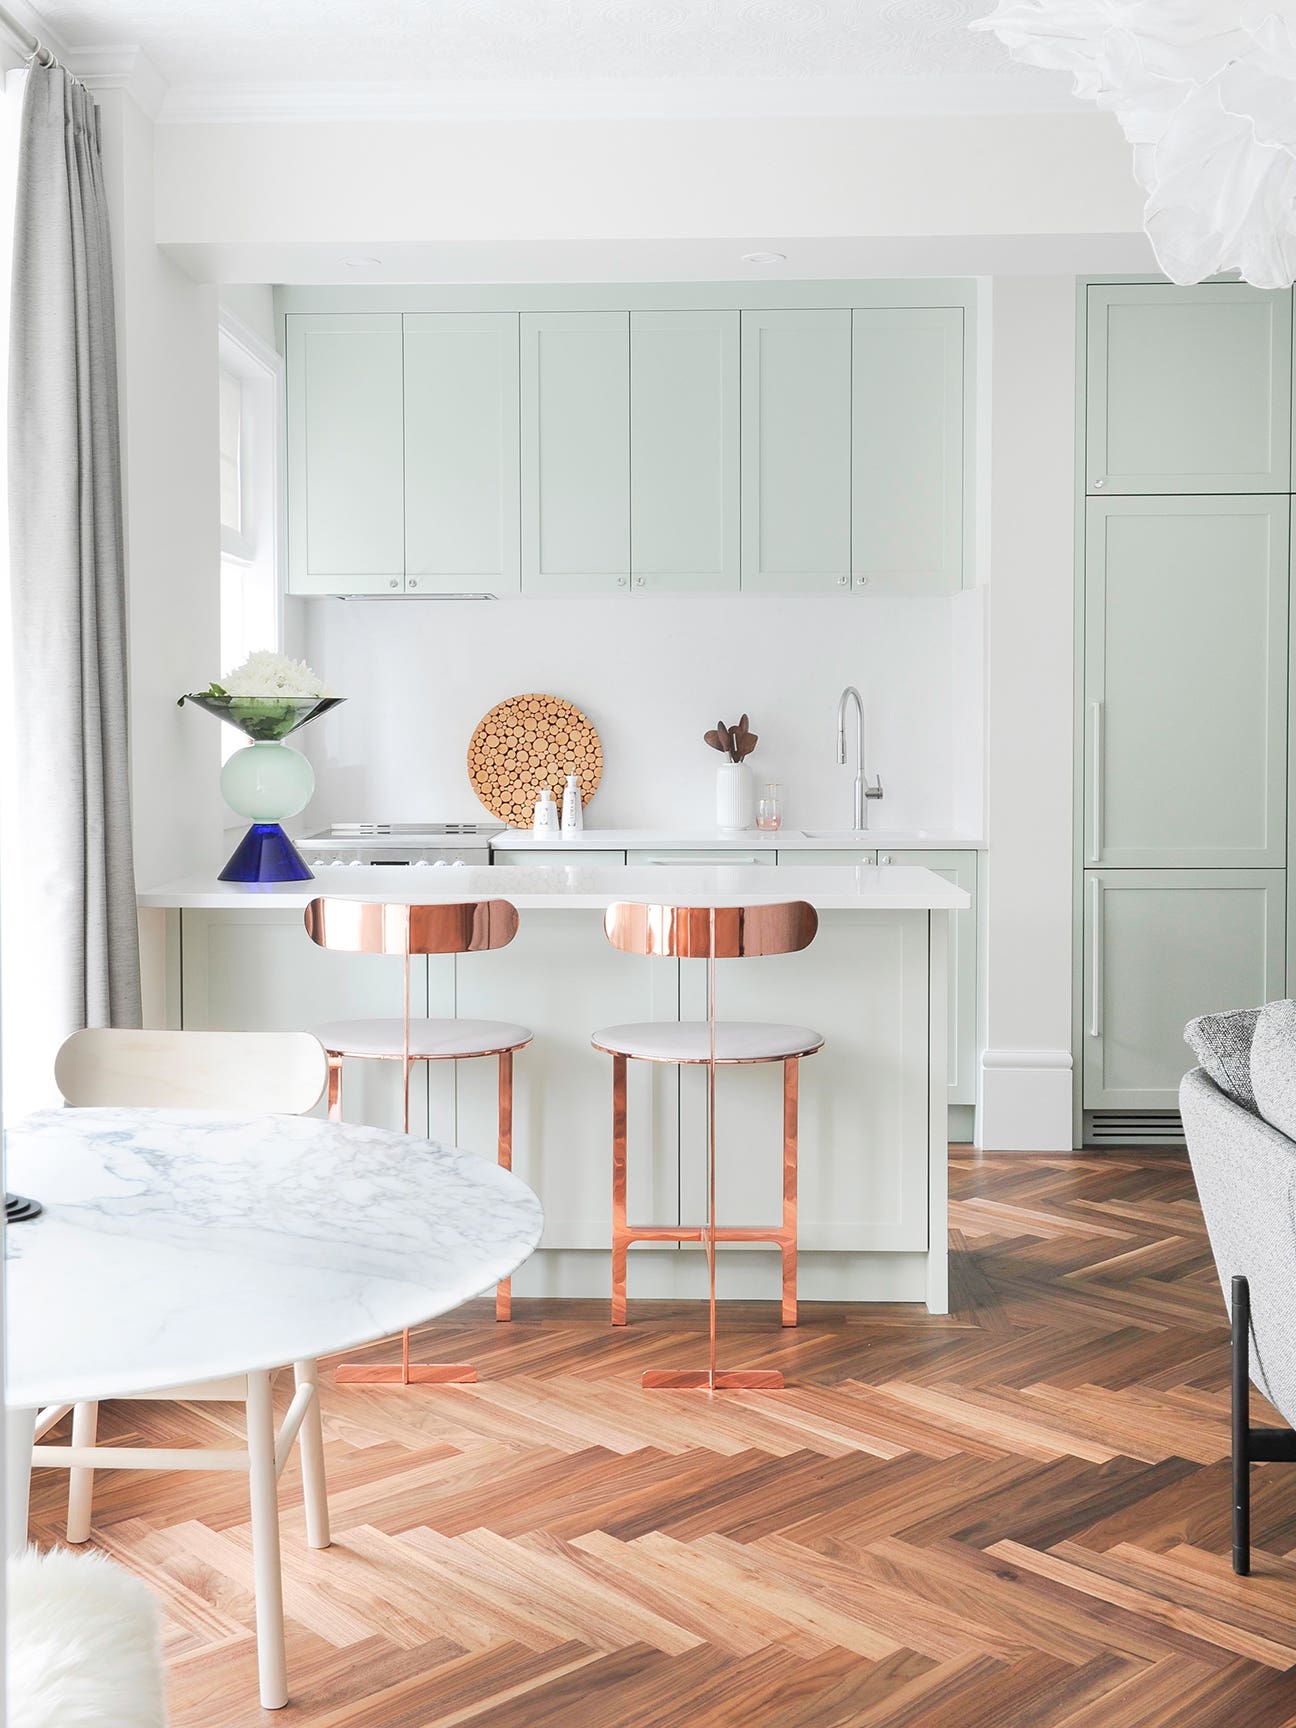 Can You Spot the Optical Illusion in This Mint Green Kitchen?